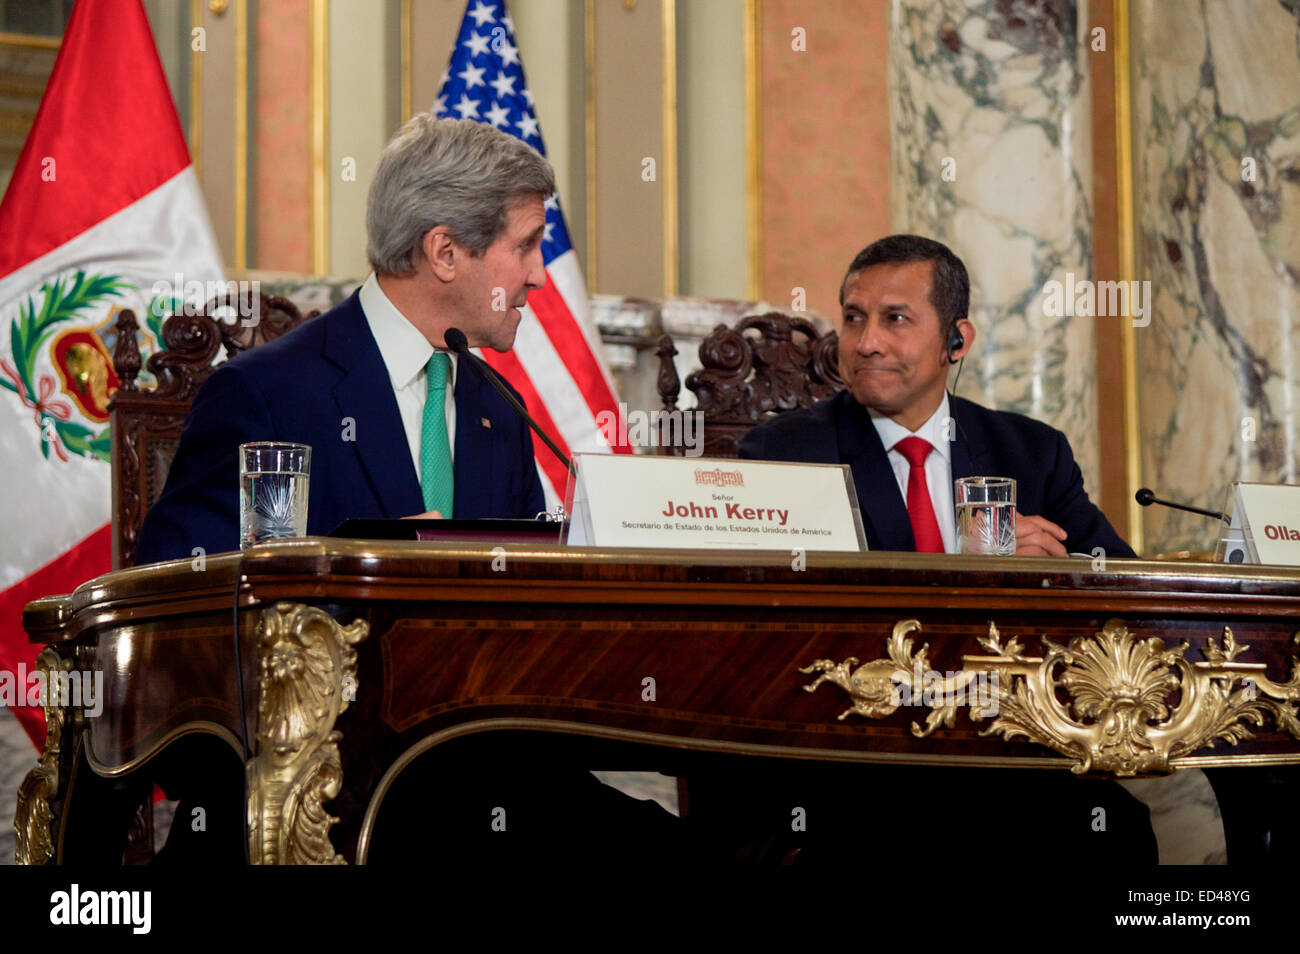 S. Secretary of State John Kerry and President Ollanta Humala of Peru deliver a pair of statements to news reporters following a bilateral meeting in the Presidential Palace in Lima, Peru, on Dec. 11, 2014, and after the Secretary addressed the 20th session of the Conference of the Parties to the United Nations Framework Convention on Climate Change. Stock Photo